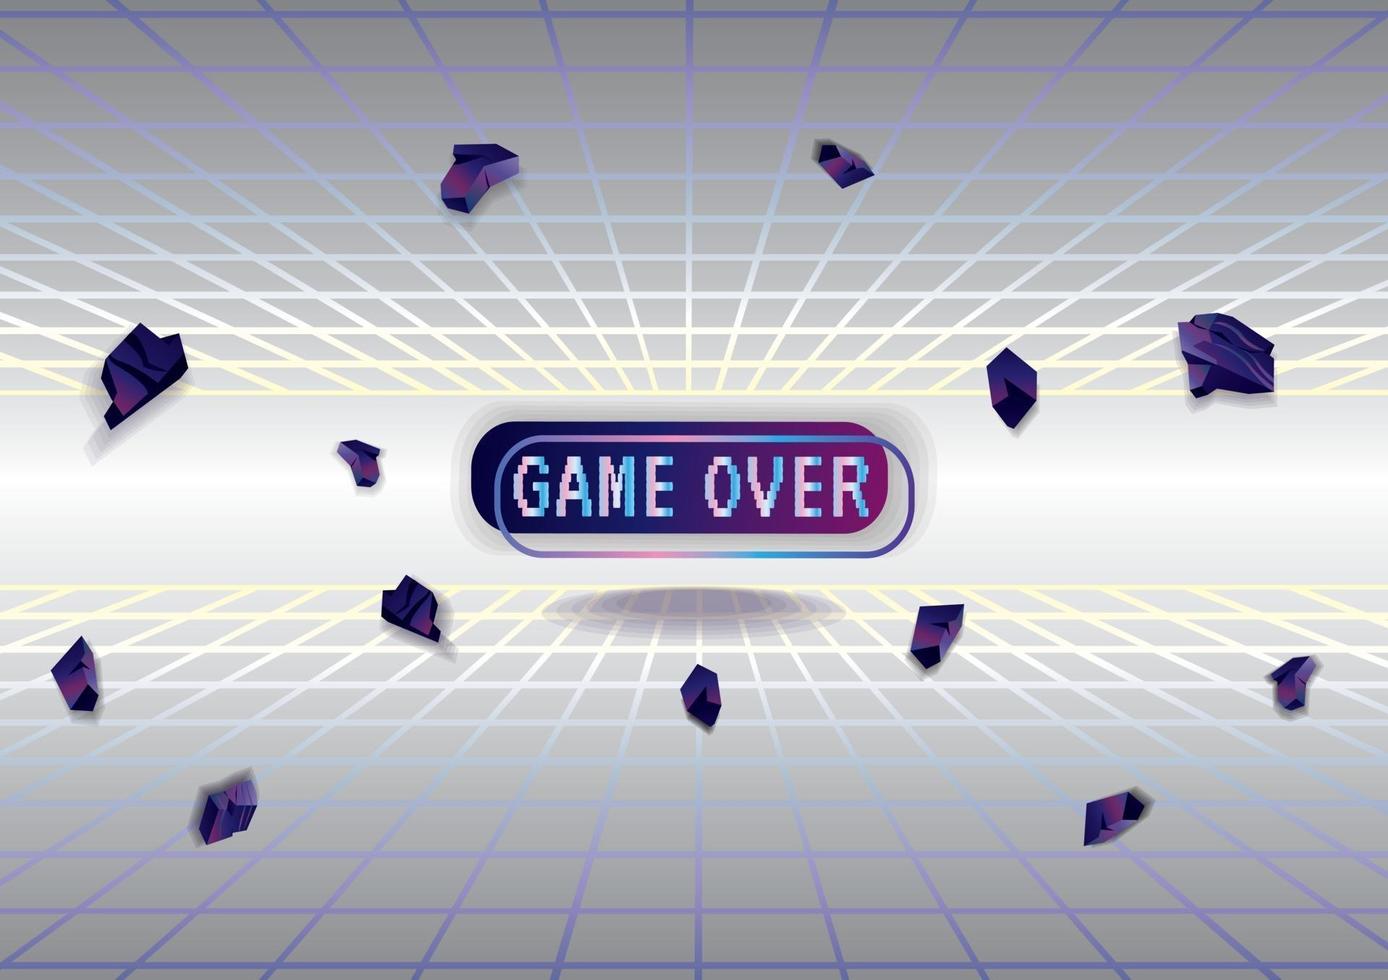 Game over game icon background vector